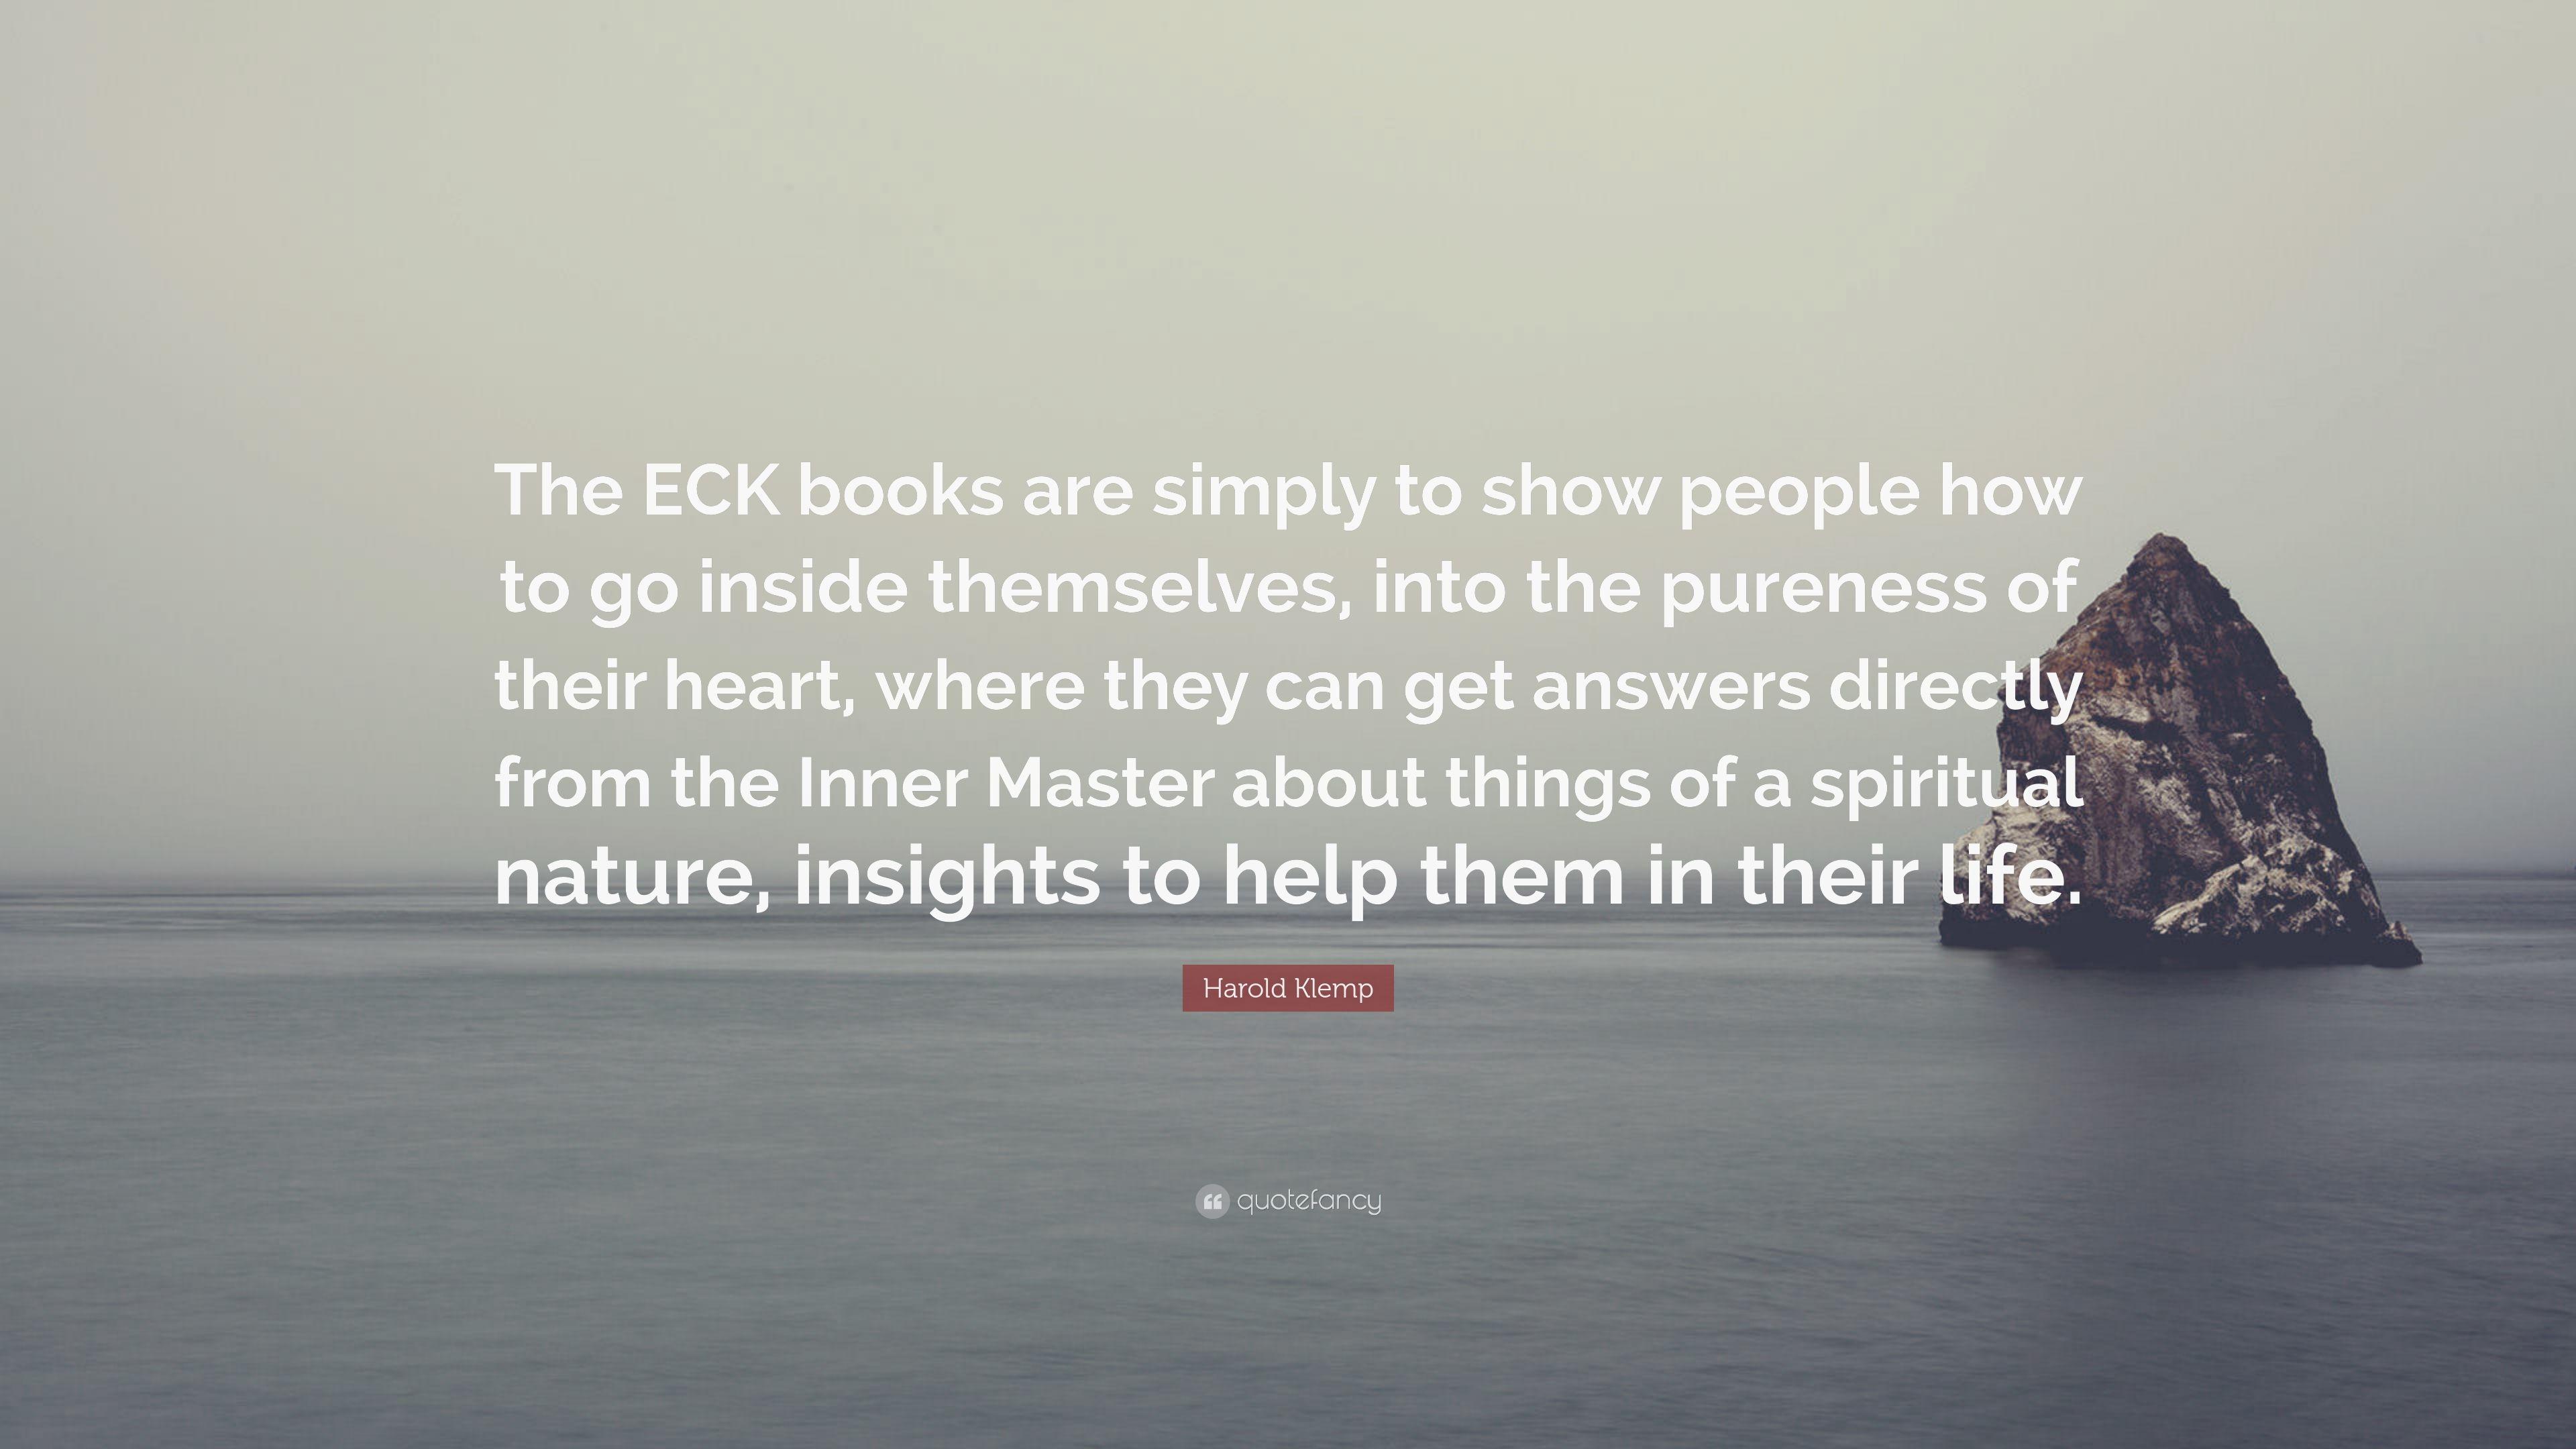 Harold Klemp Quote: “The ECK books are simply to show people how